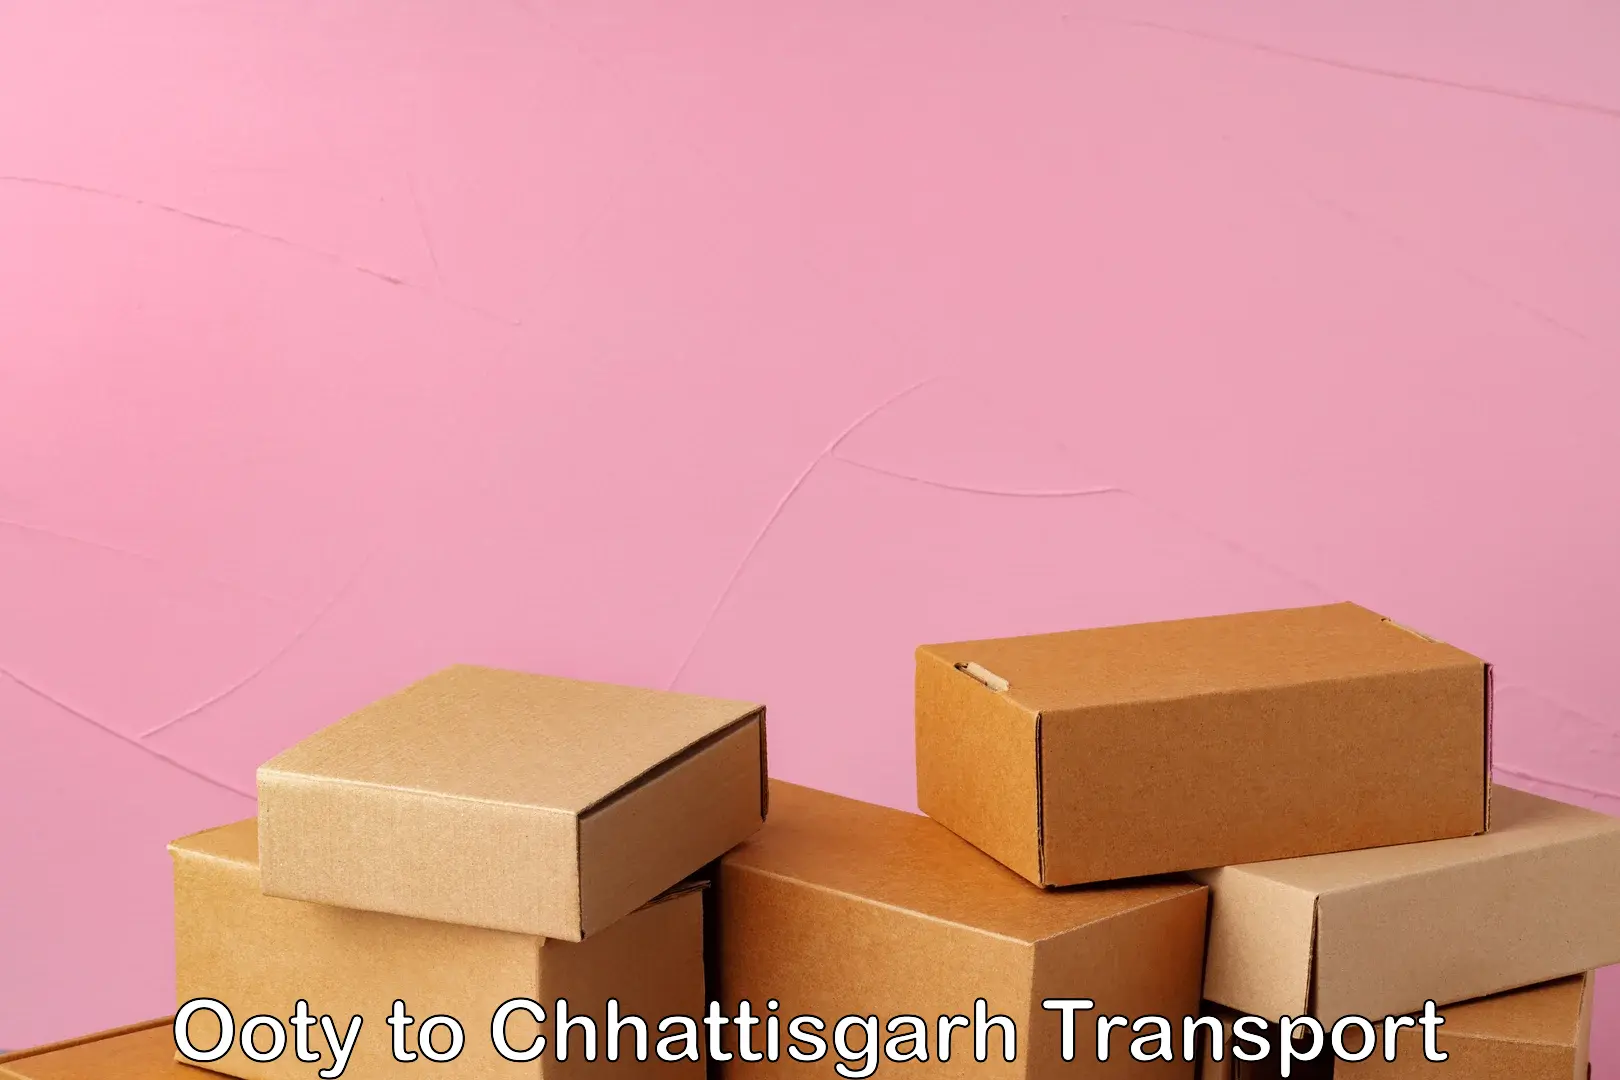 Goods delivery service Ooty to Chhattisgarh